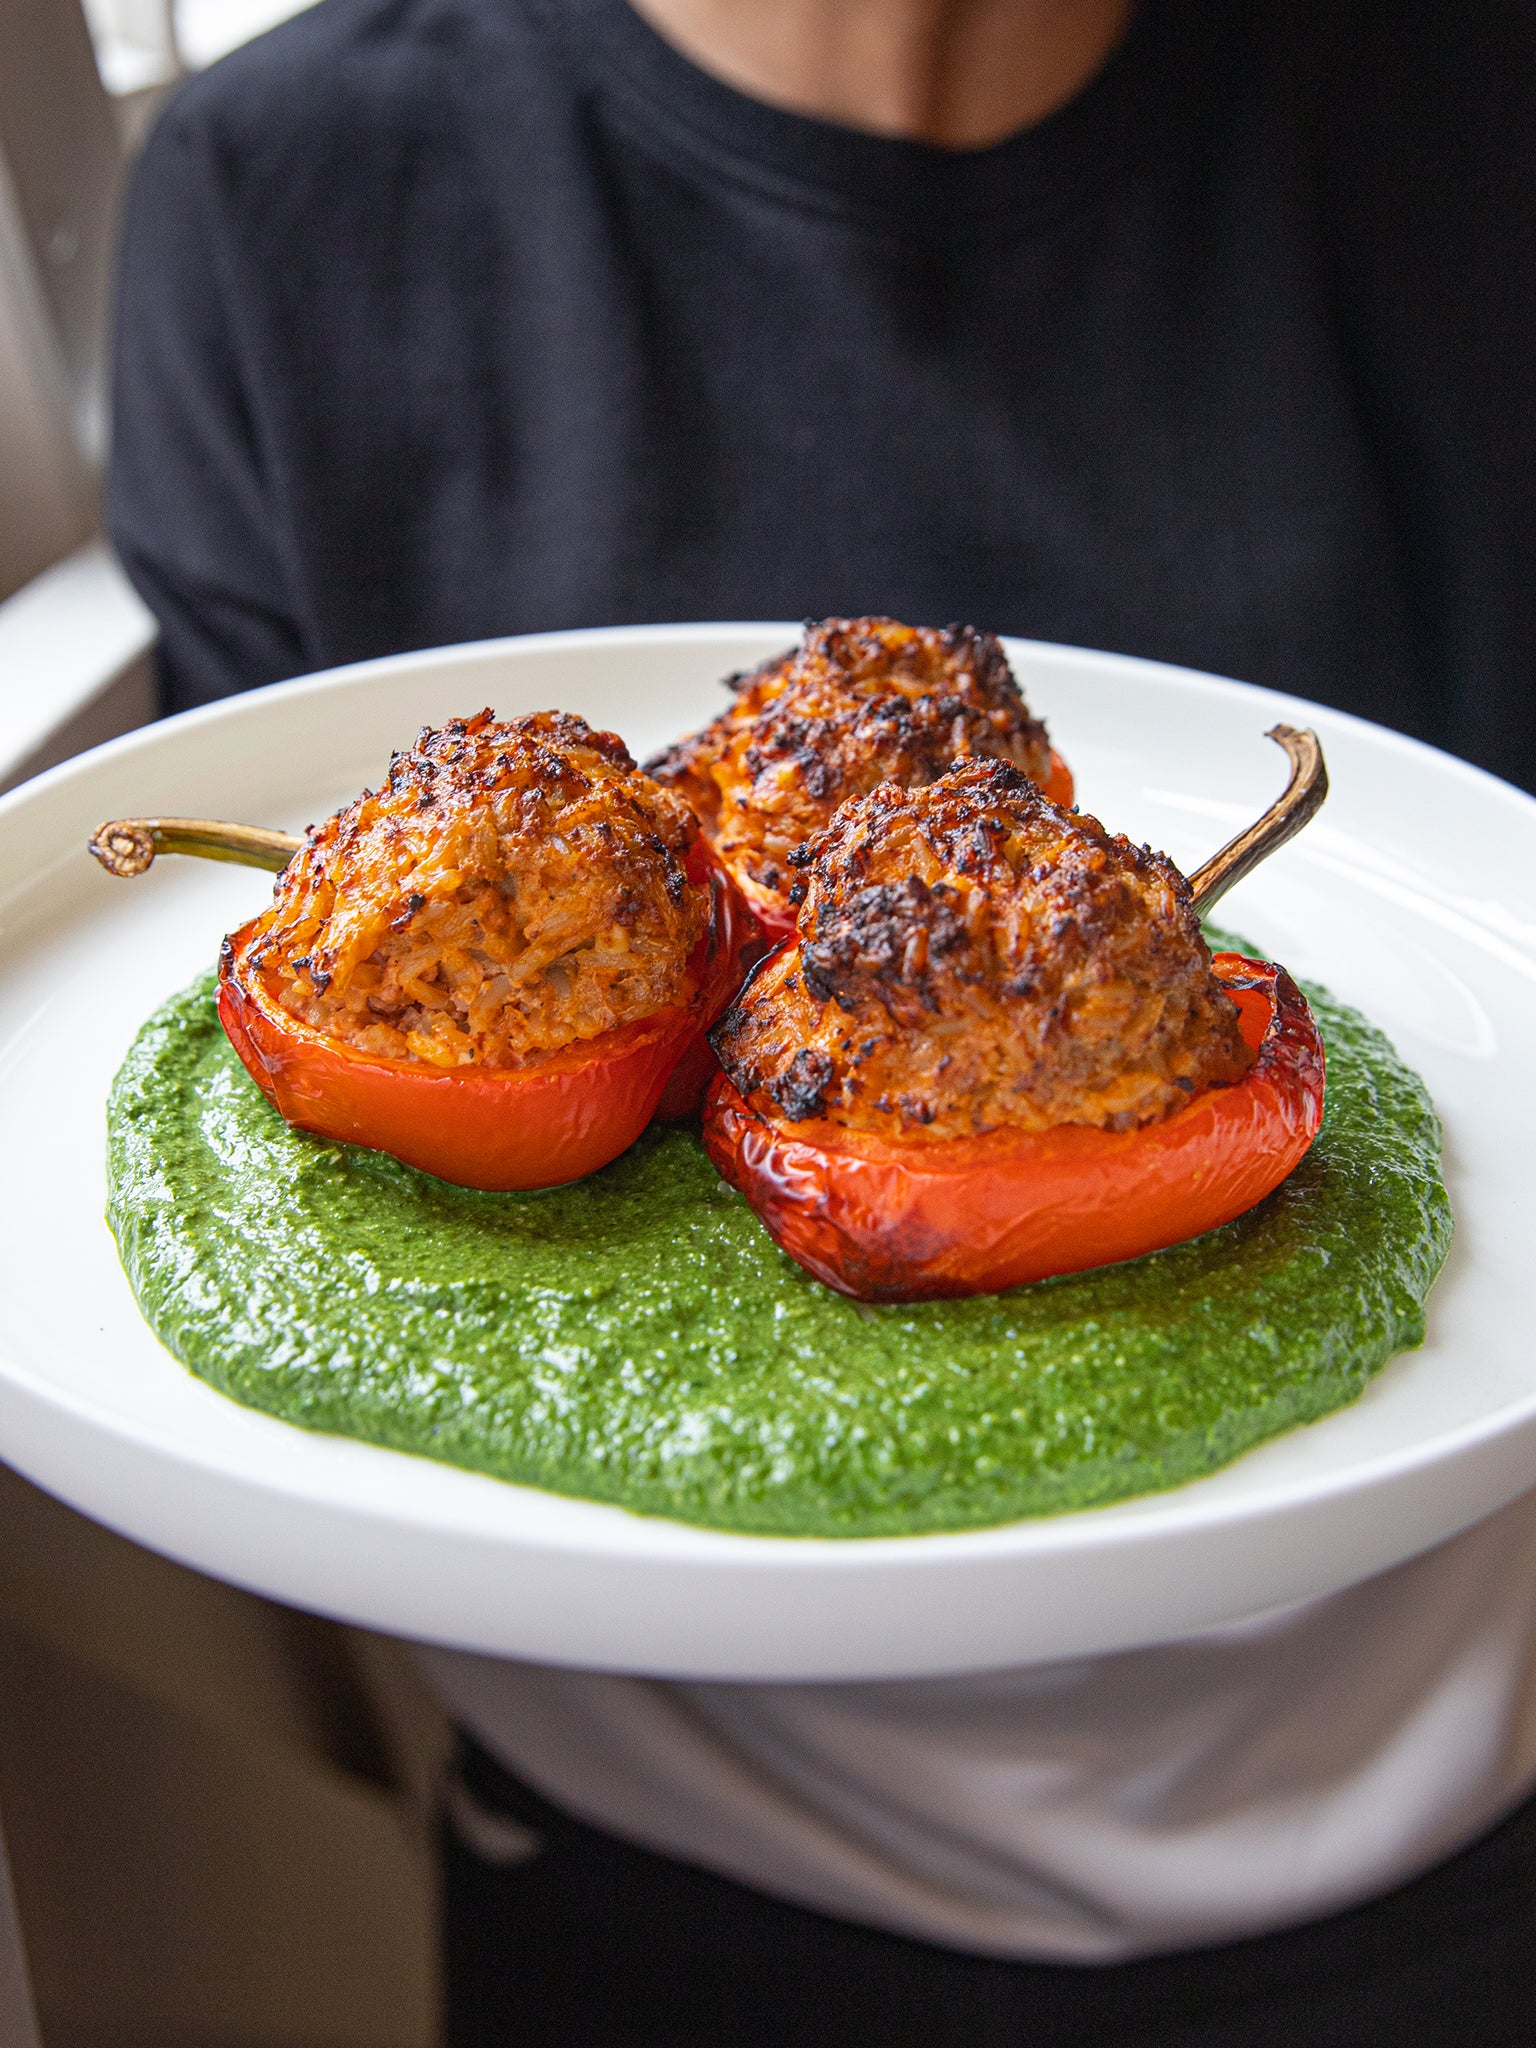 These stuffed peppers are destined to become a staple in your kitchen repertoire